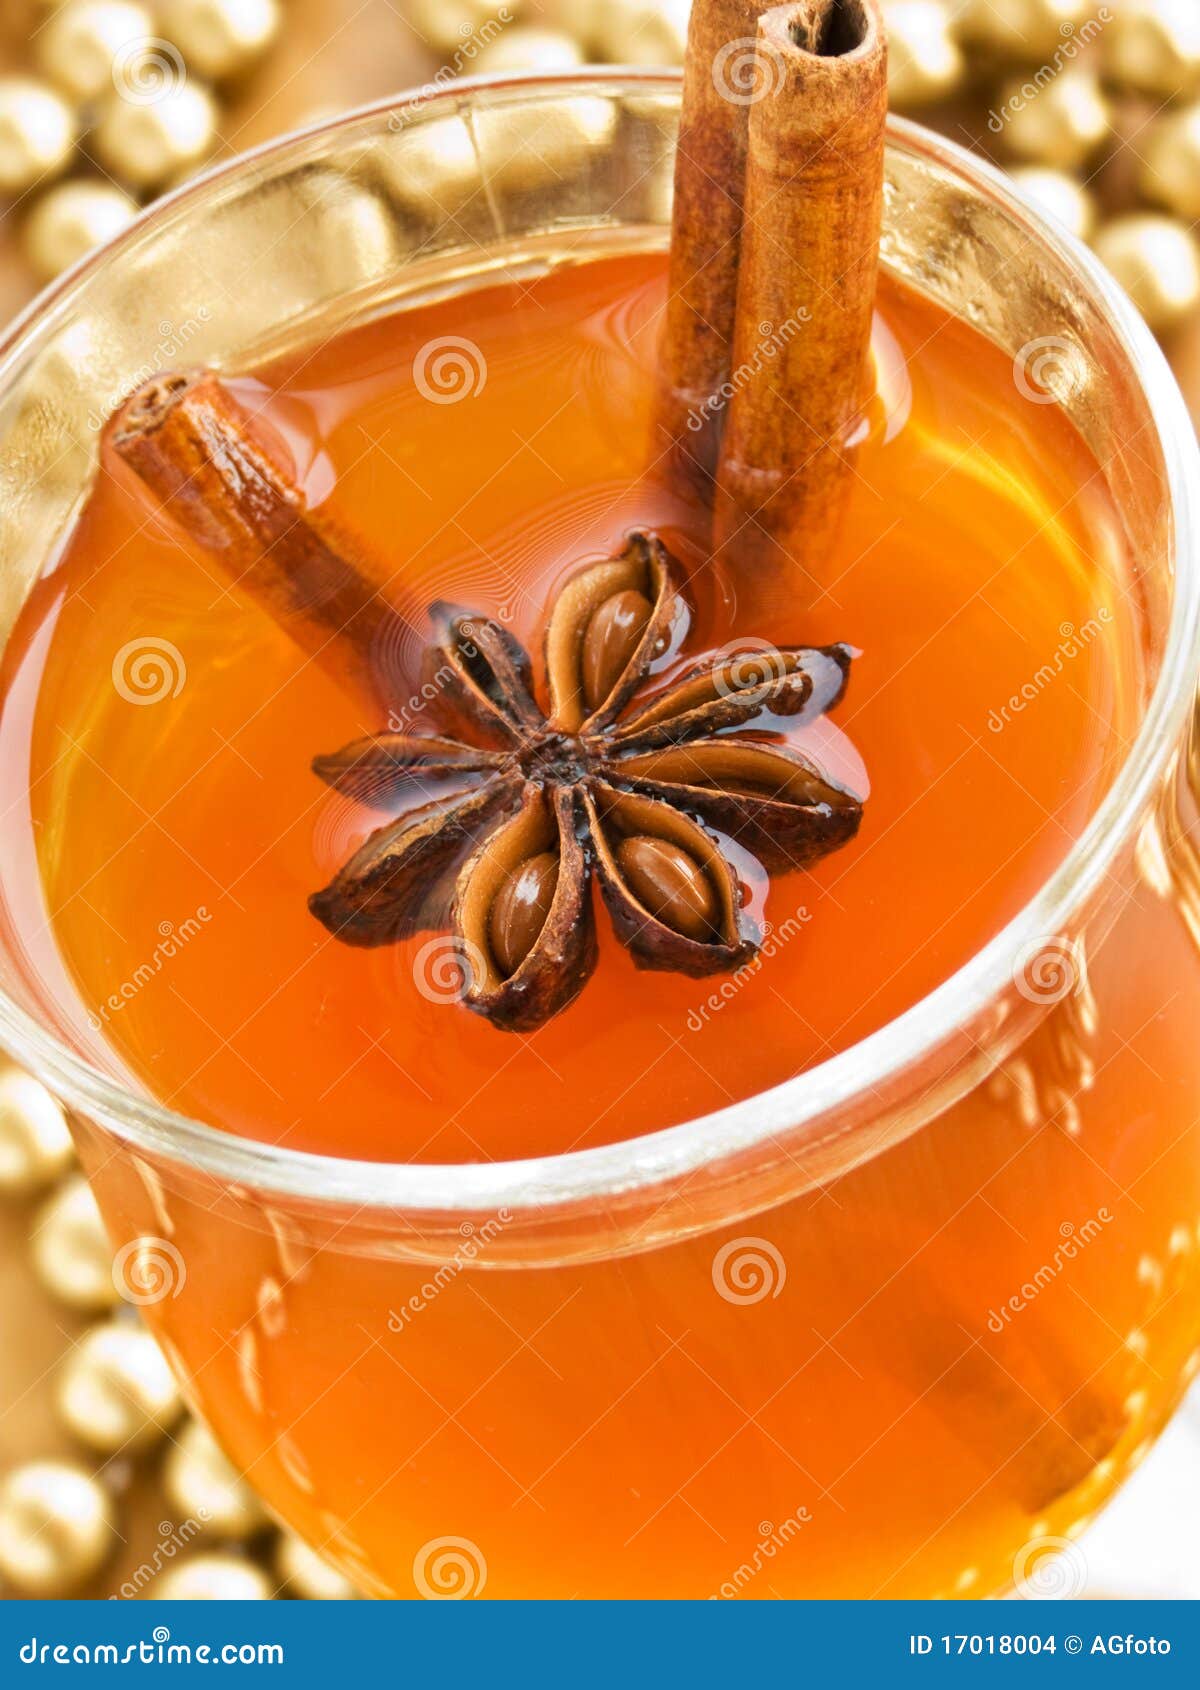 Hot toddy stock photo. Image of color, star, holiday - 17018004